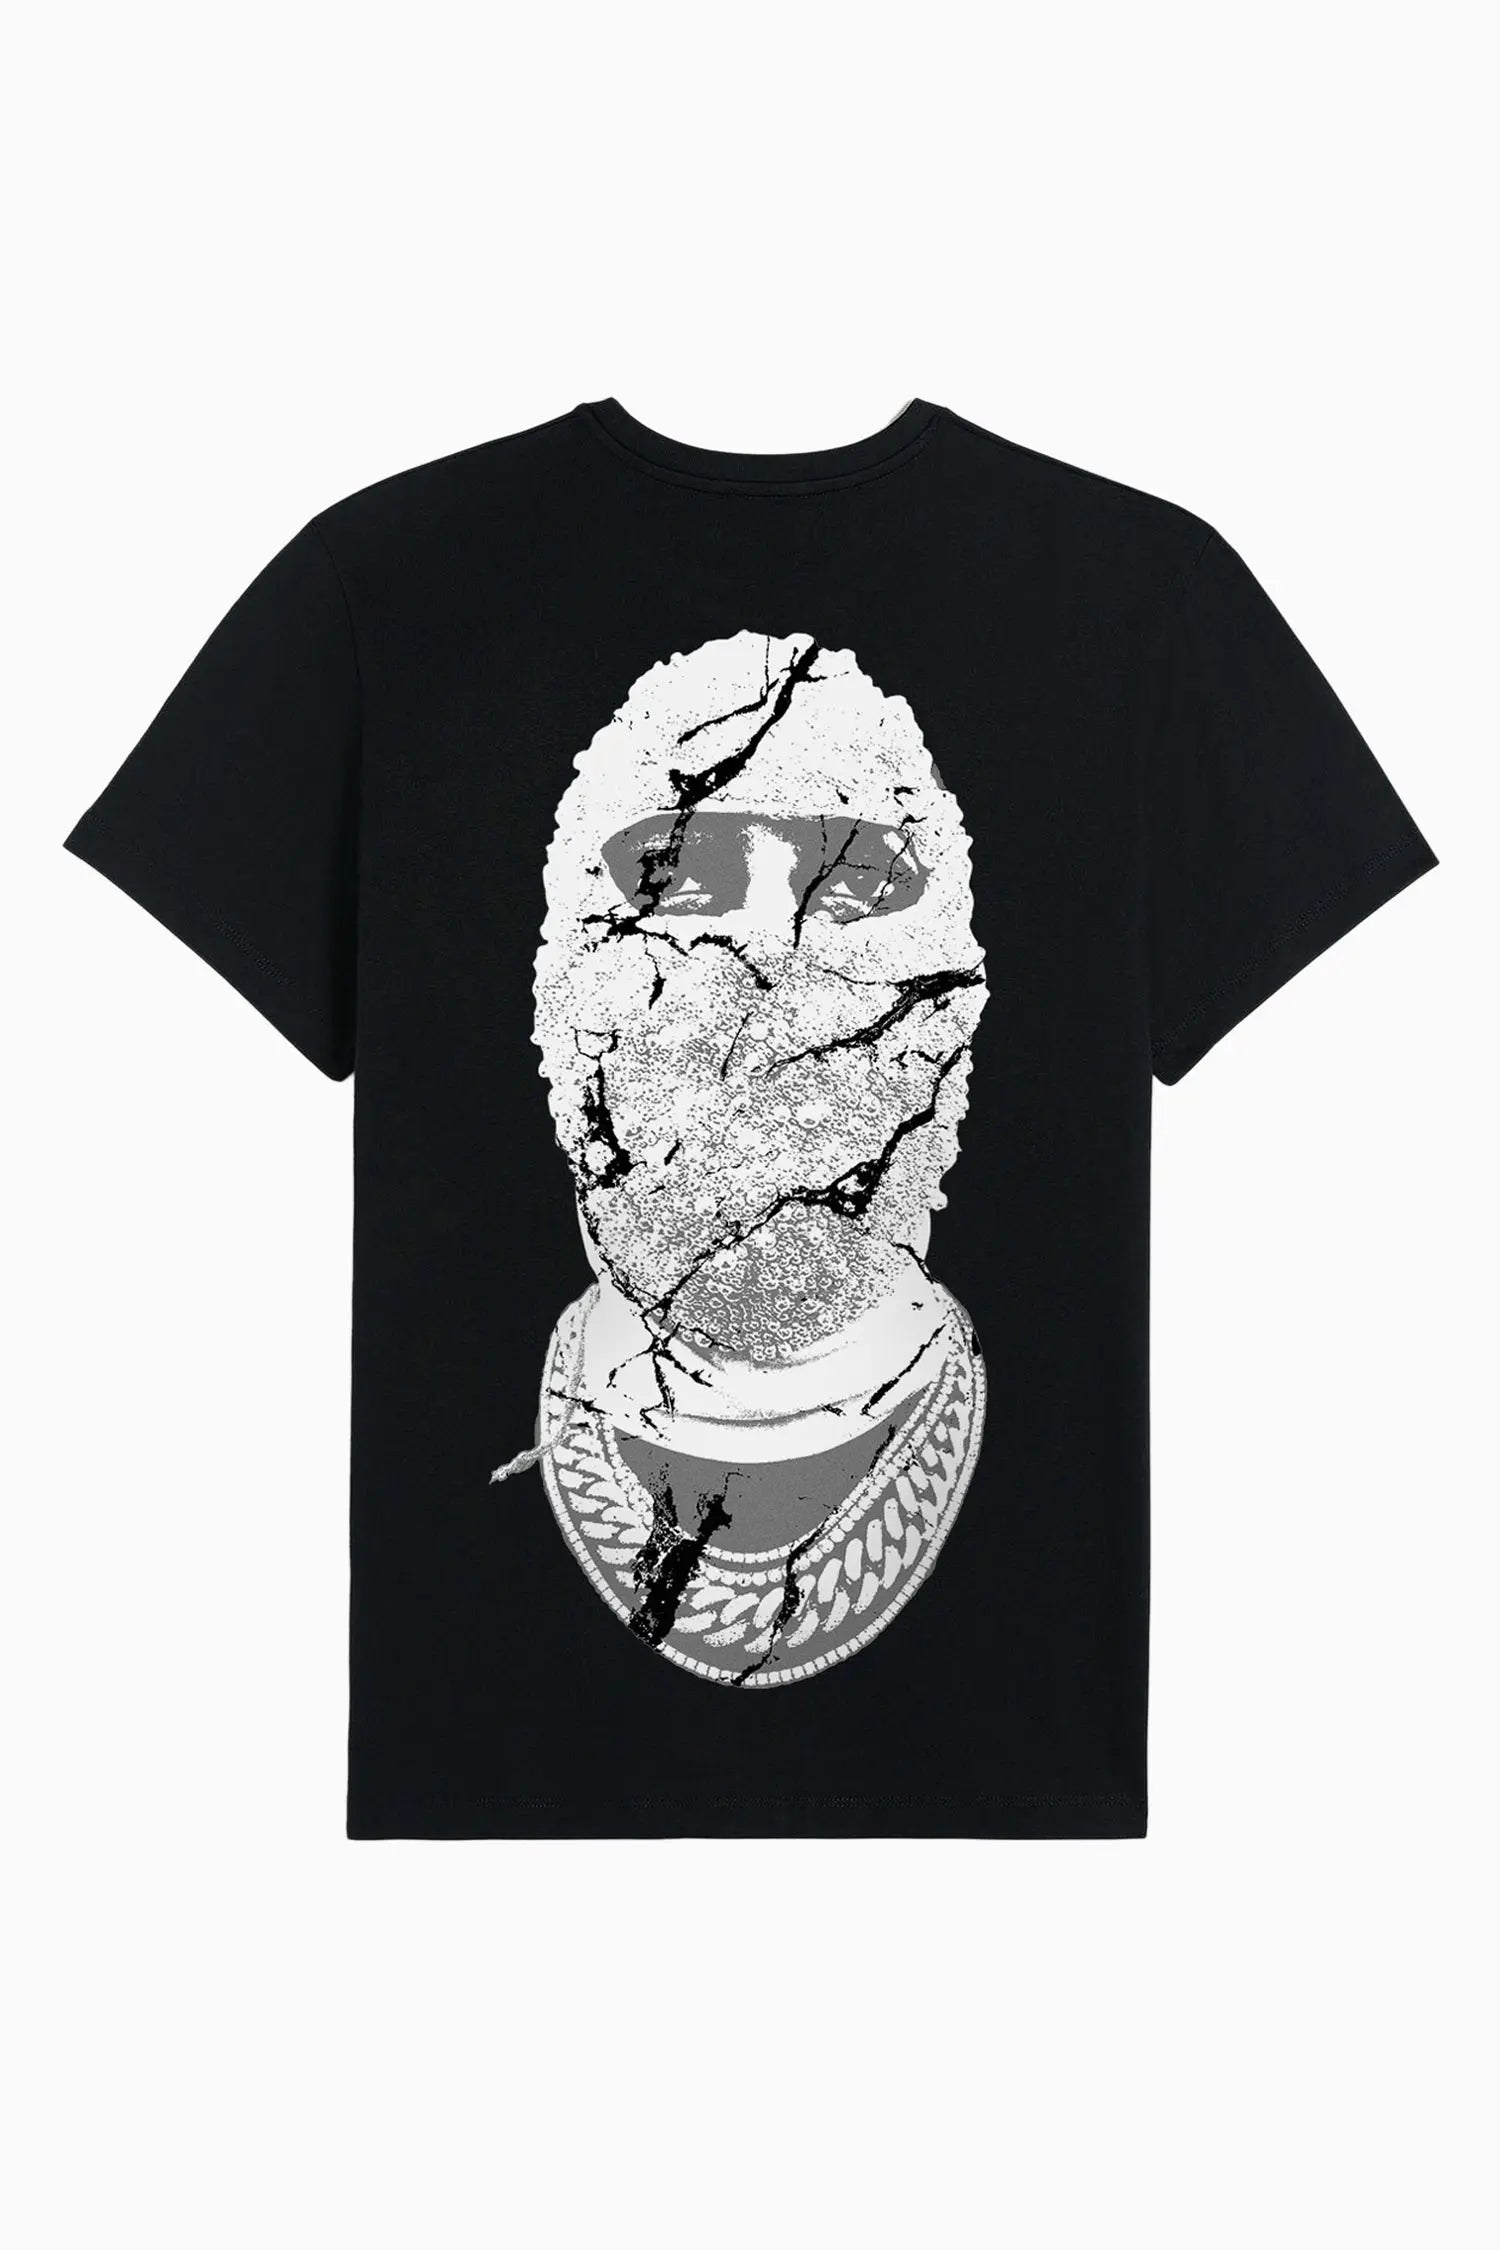 Socially Distant T-shirt with Marble Mask - IH NOM UH NIT